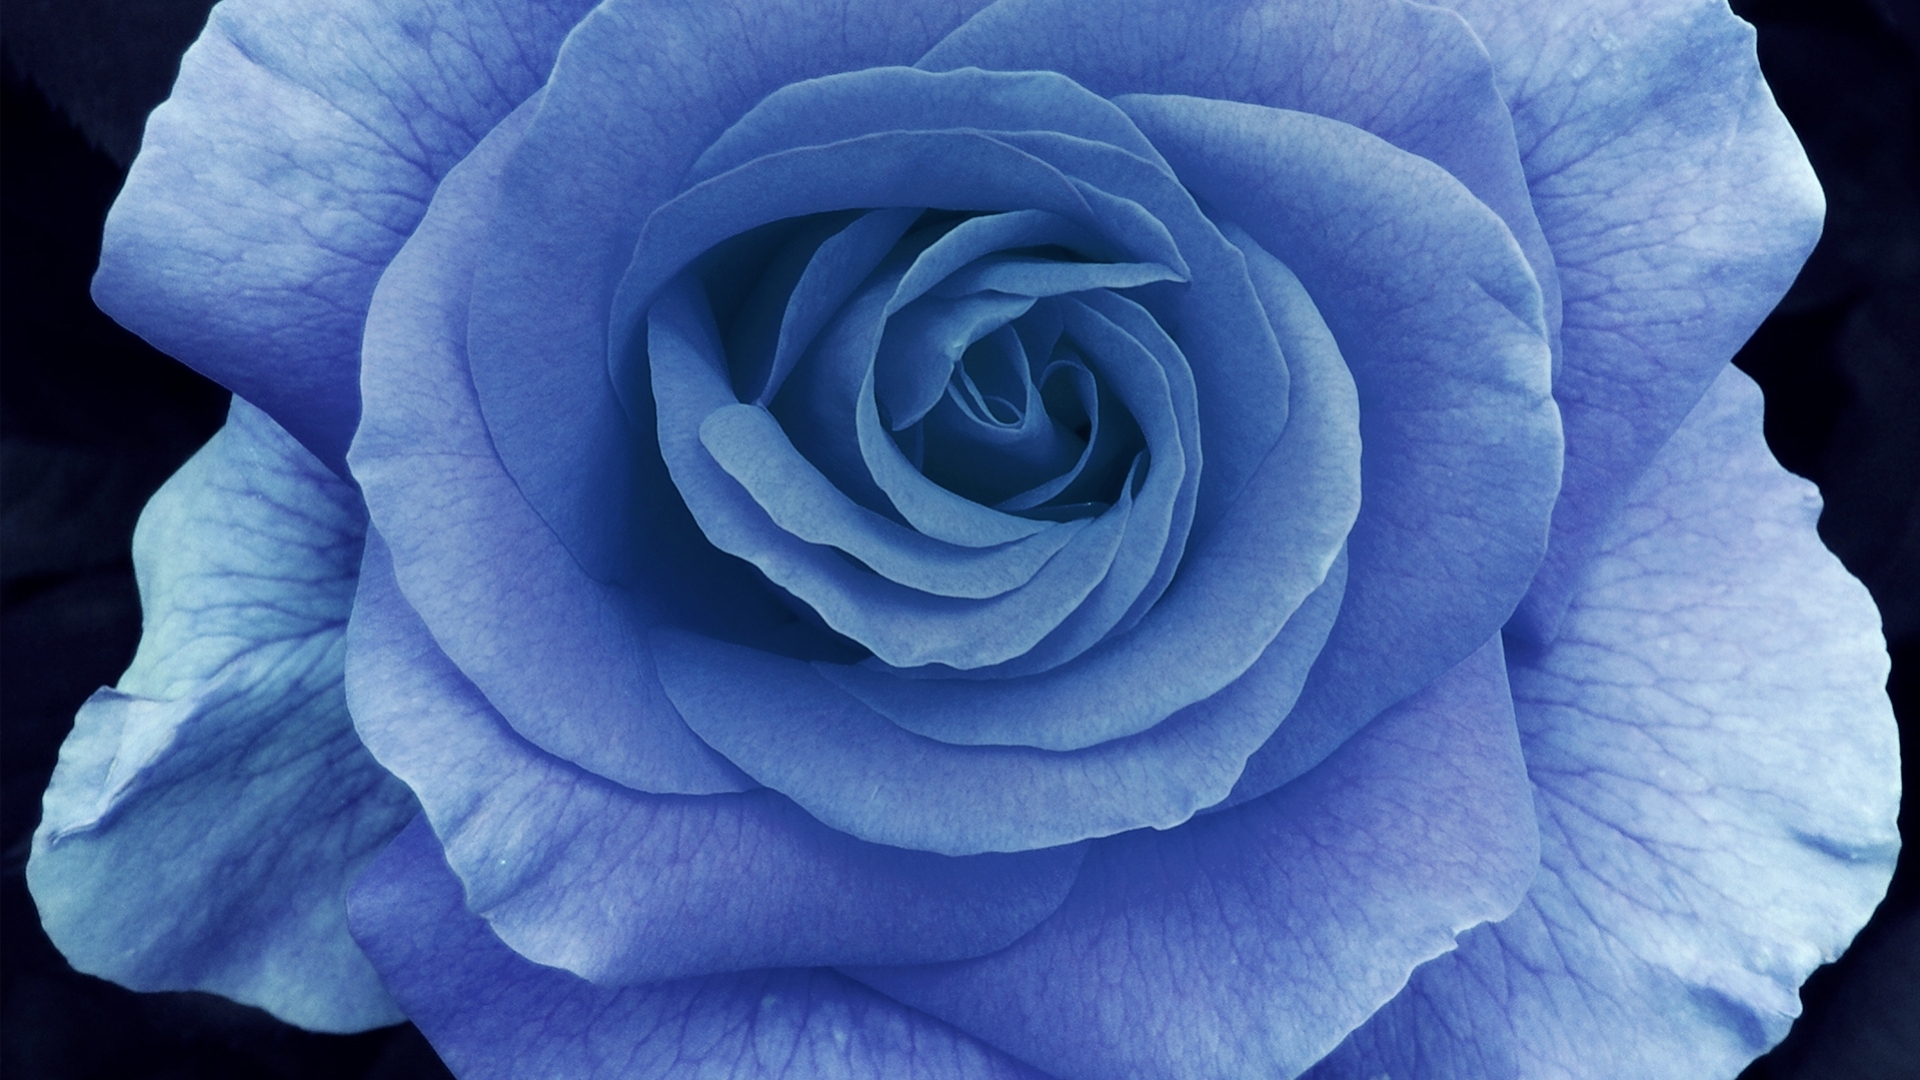 Big Blue Rose On A Dark Background Wallpaper And Image